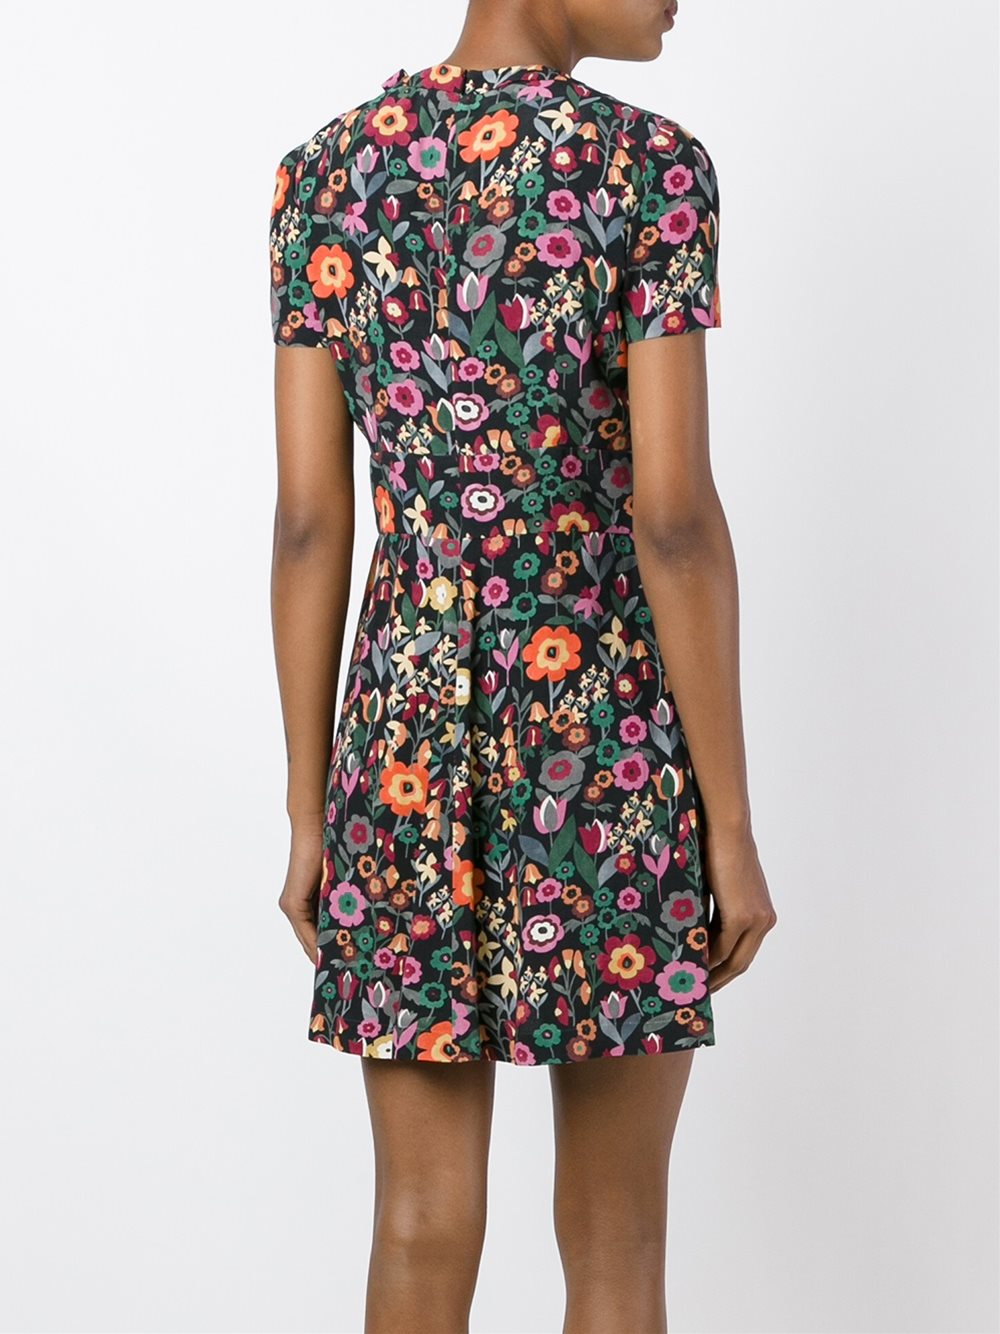 Red valentino Floral Print Shortsleeved Dress in Black | Lyst